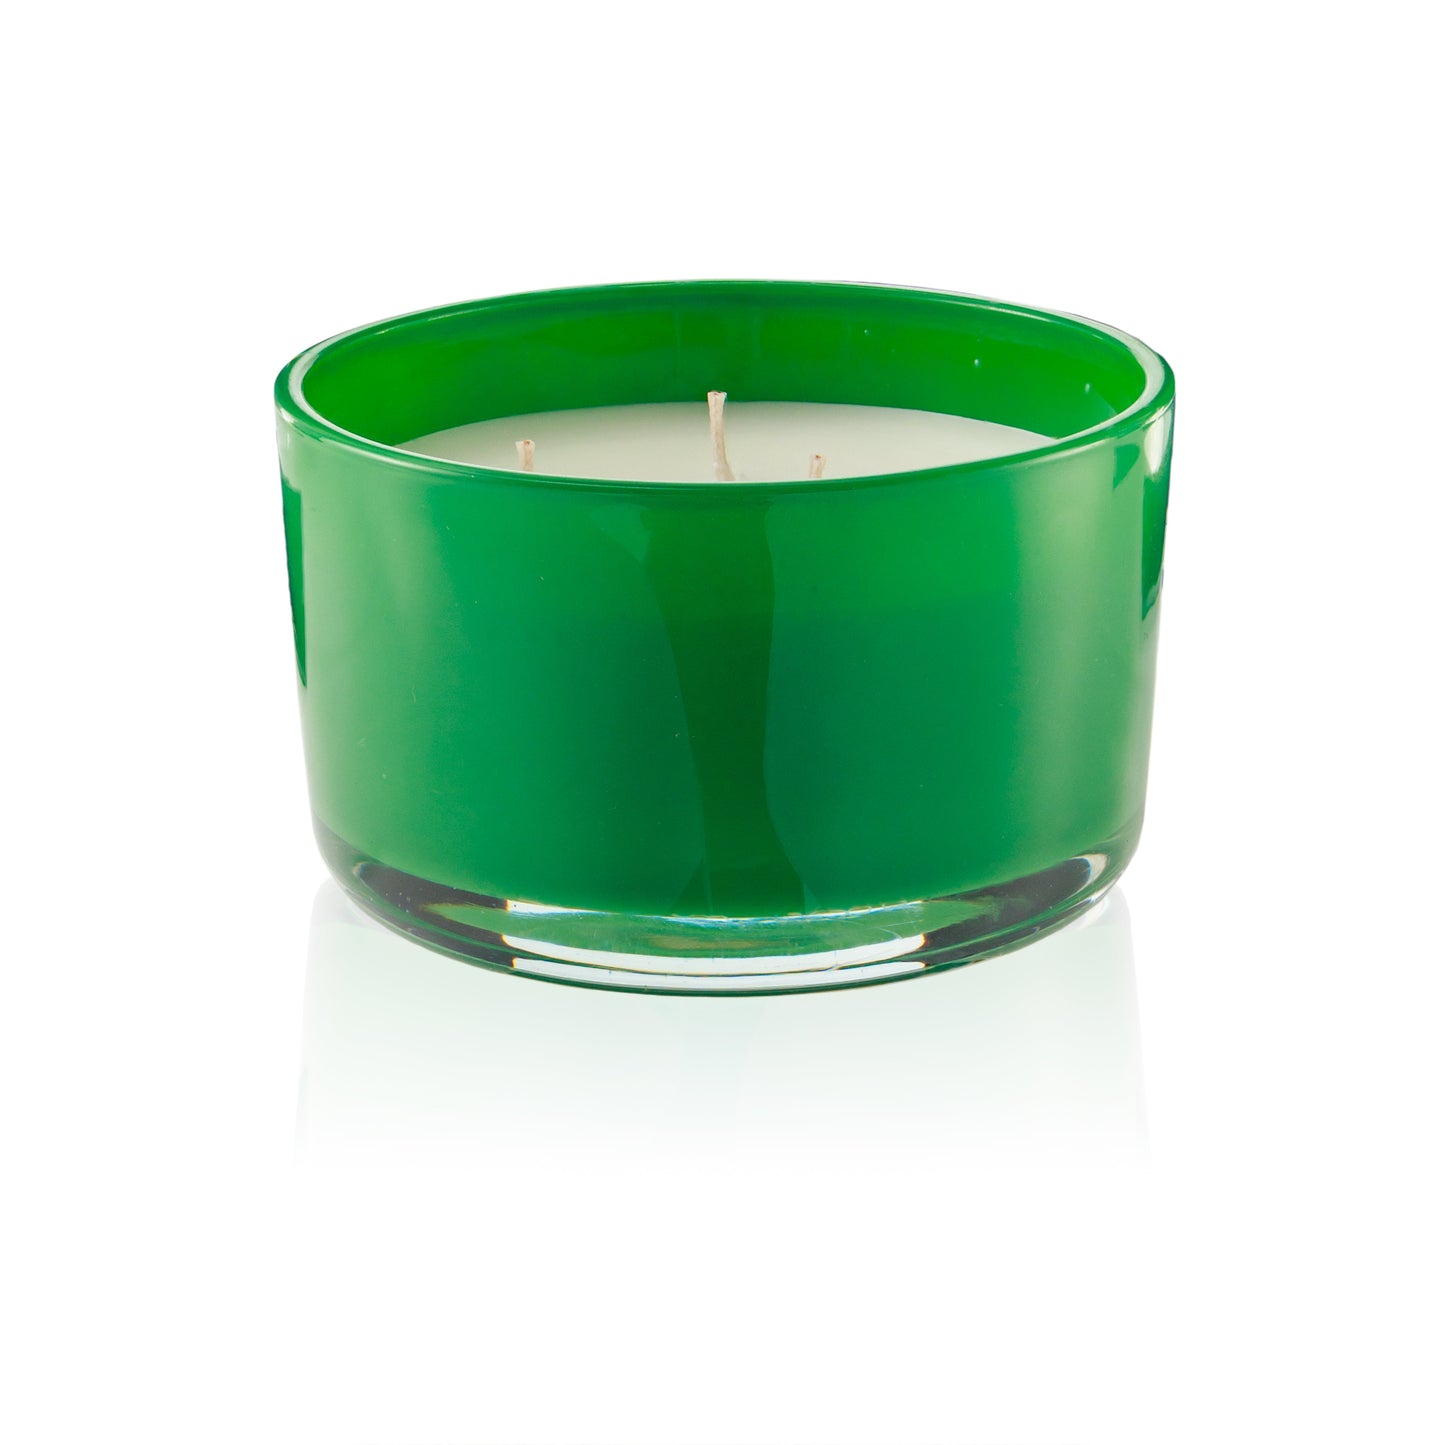 Pier 1 Holiday Forest Filled 3-Wick Candle 14oz